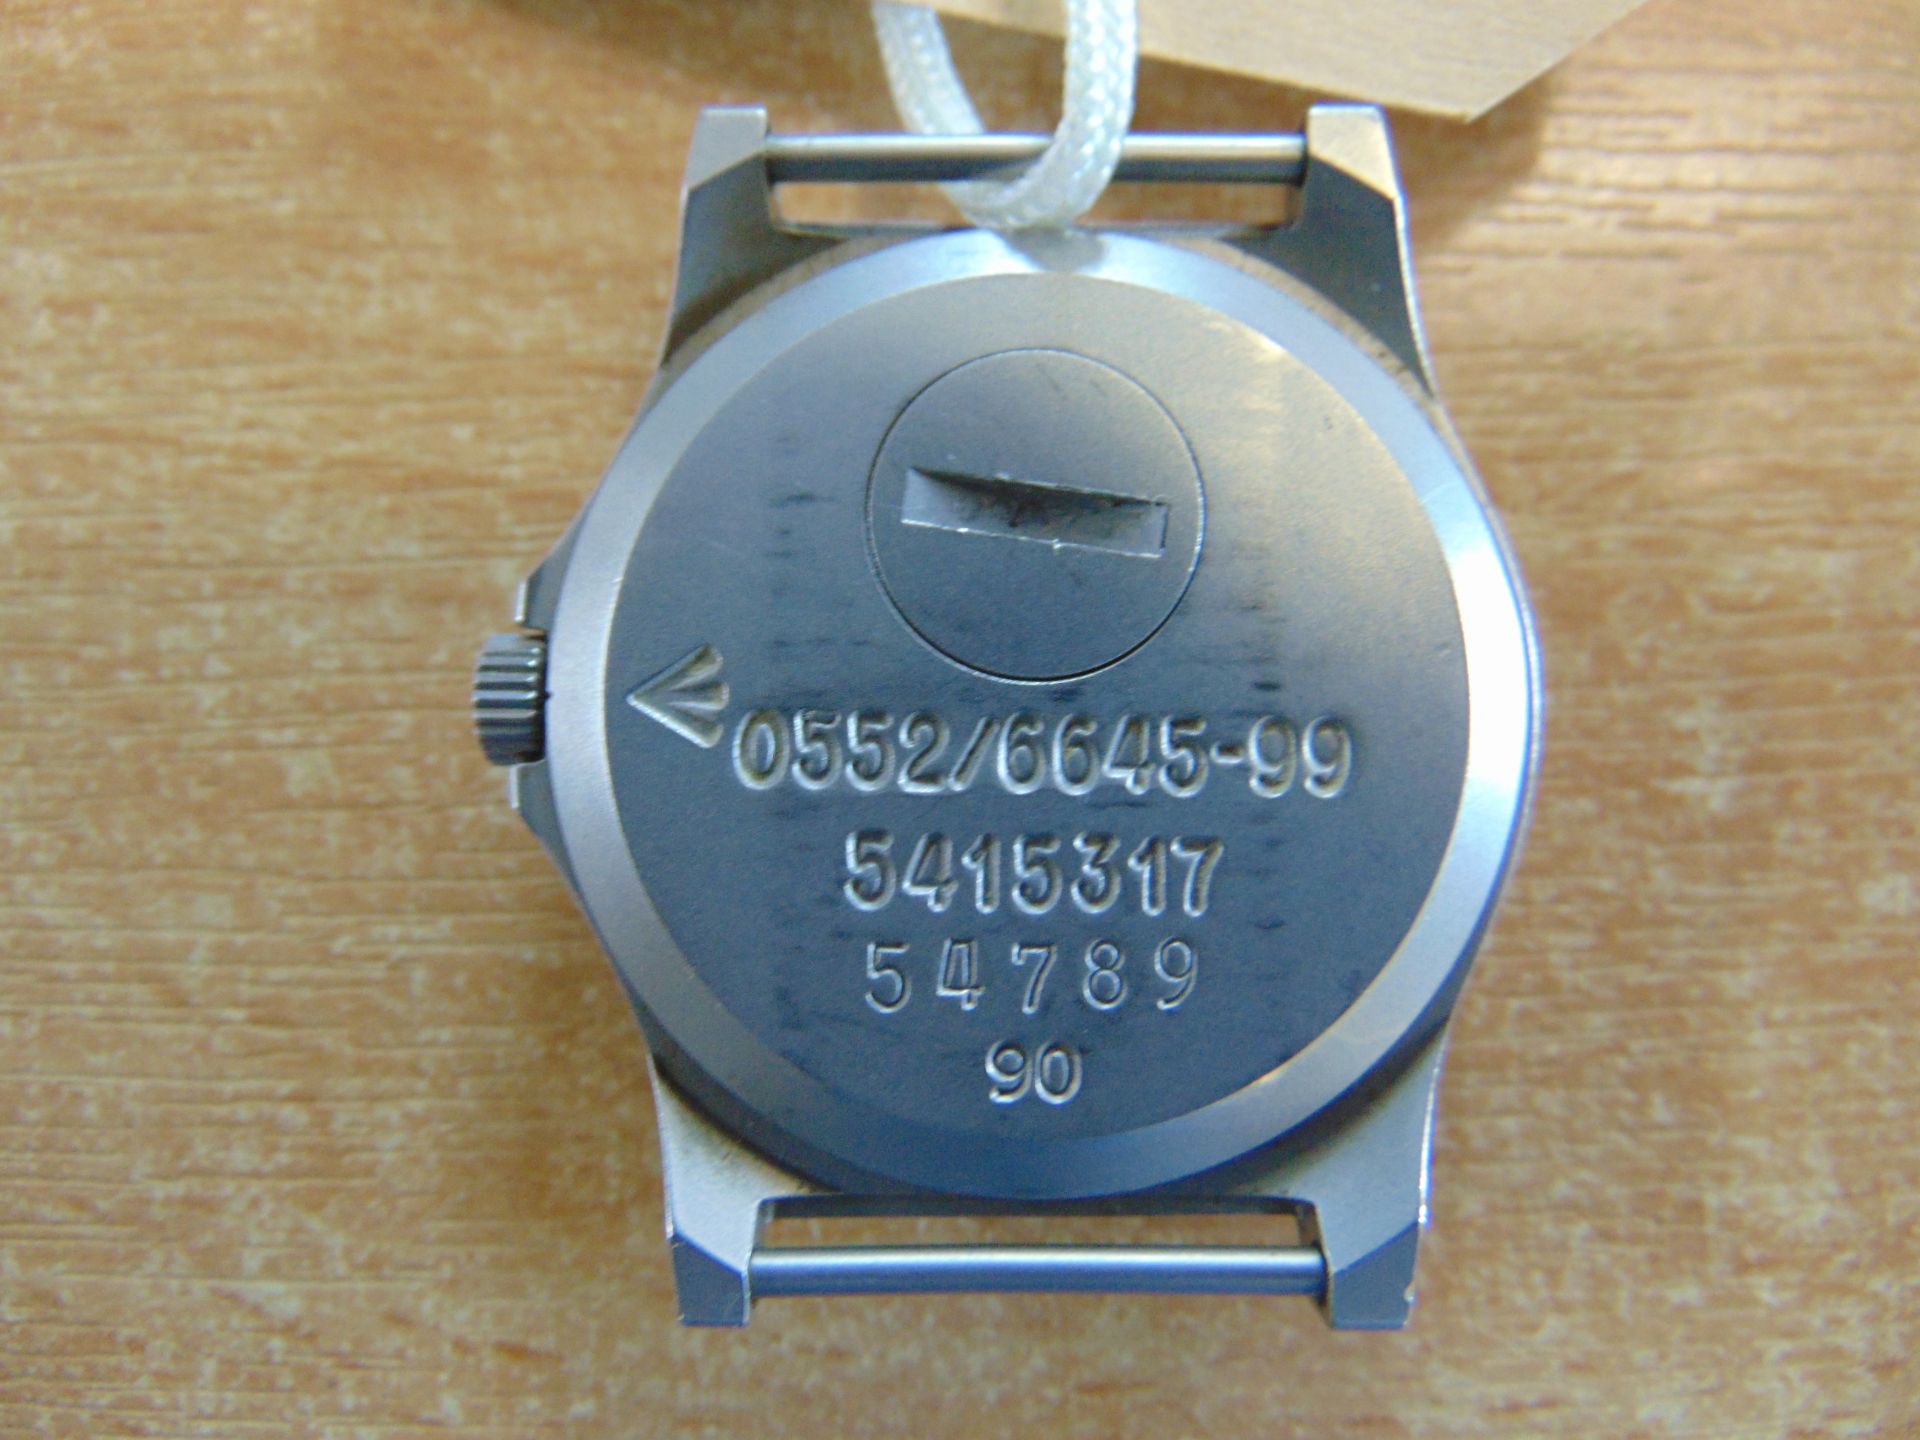 Rare CWC 0552 Royal Marines Issue Service Watch Nato Markings, Date 1990, Gulf War 1. Small Chip - Image 3 of 4